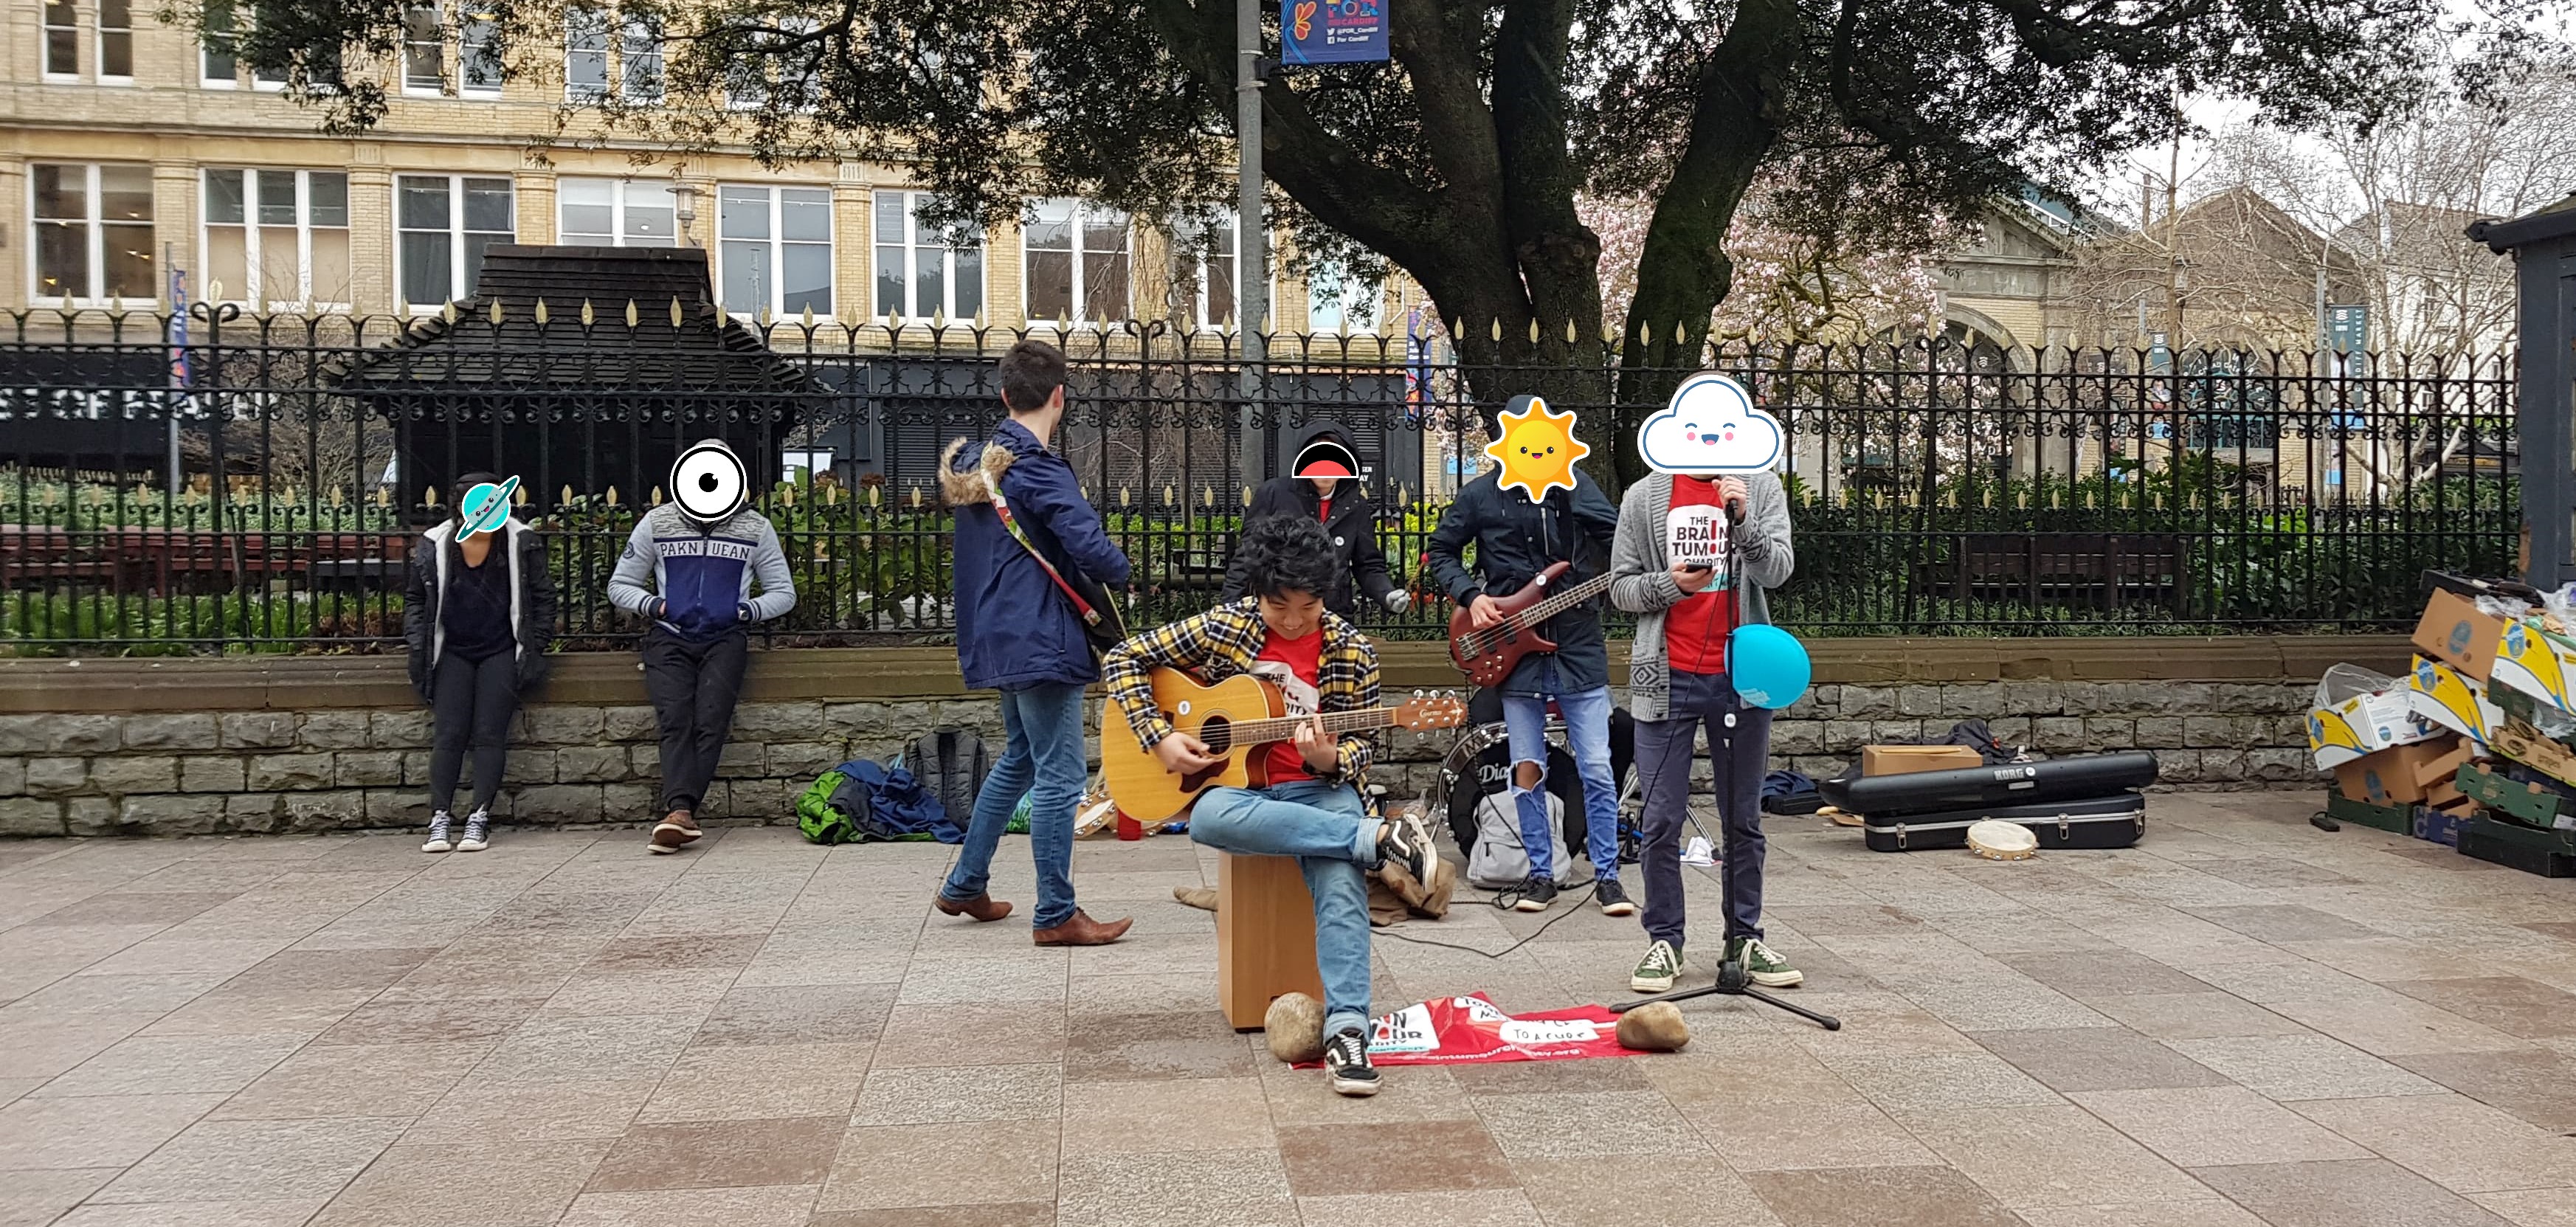 Me and a few others busking for the Brain Tumour Charity outside St David's in Cardiff